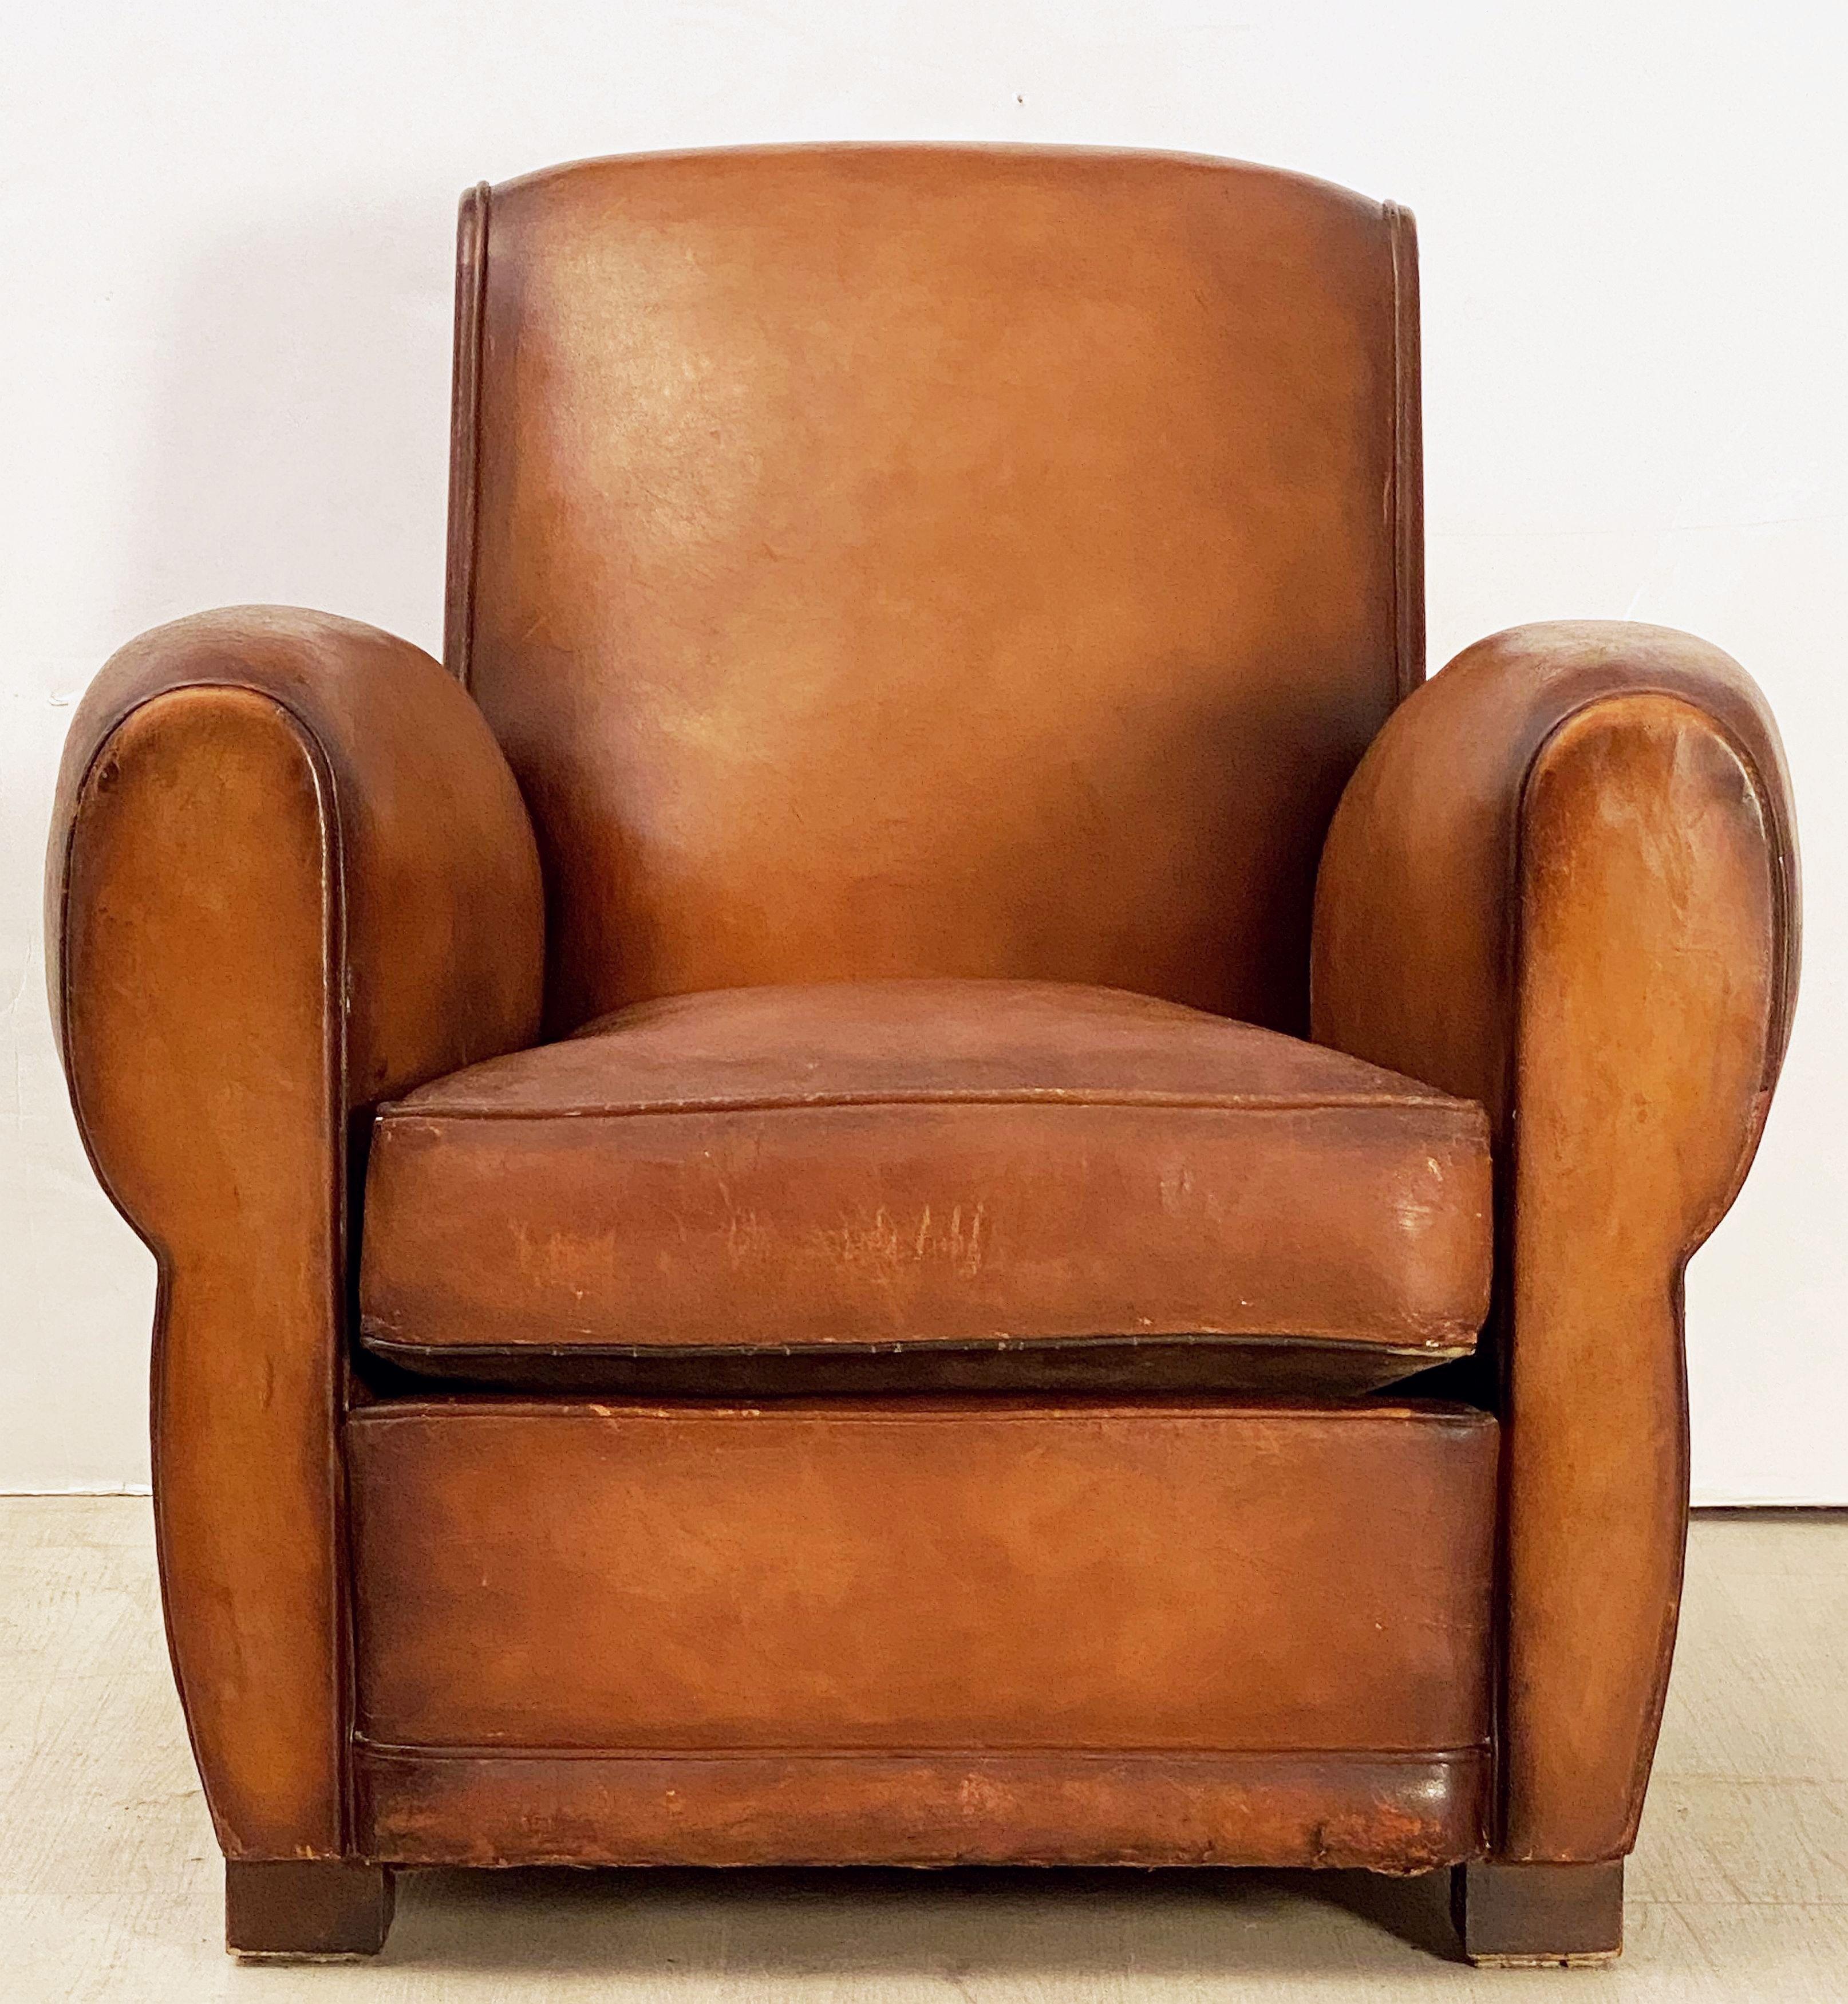 A handsome vintage French leather upholstered club or lounge chair from the Art Deco era - featuring a comfortable back and seat with removable cushion, with stylish arms and original leather, brass nail-head trim to back, and resting on shaped